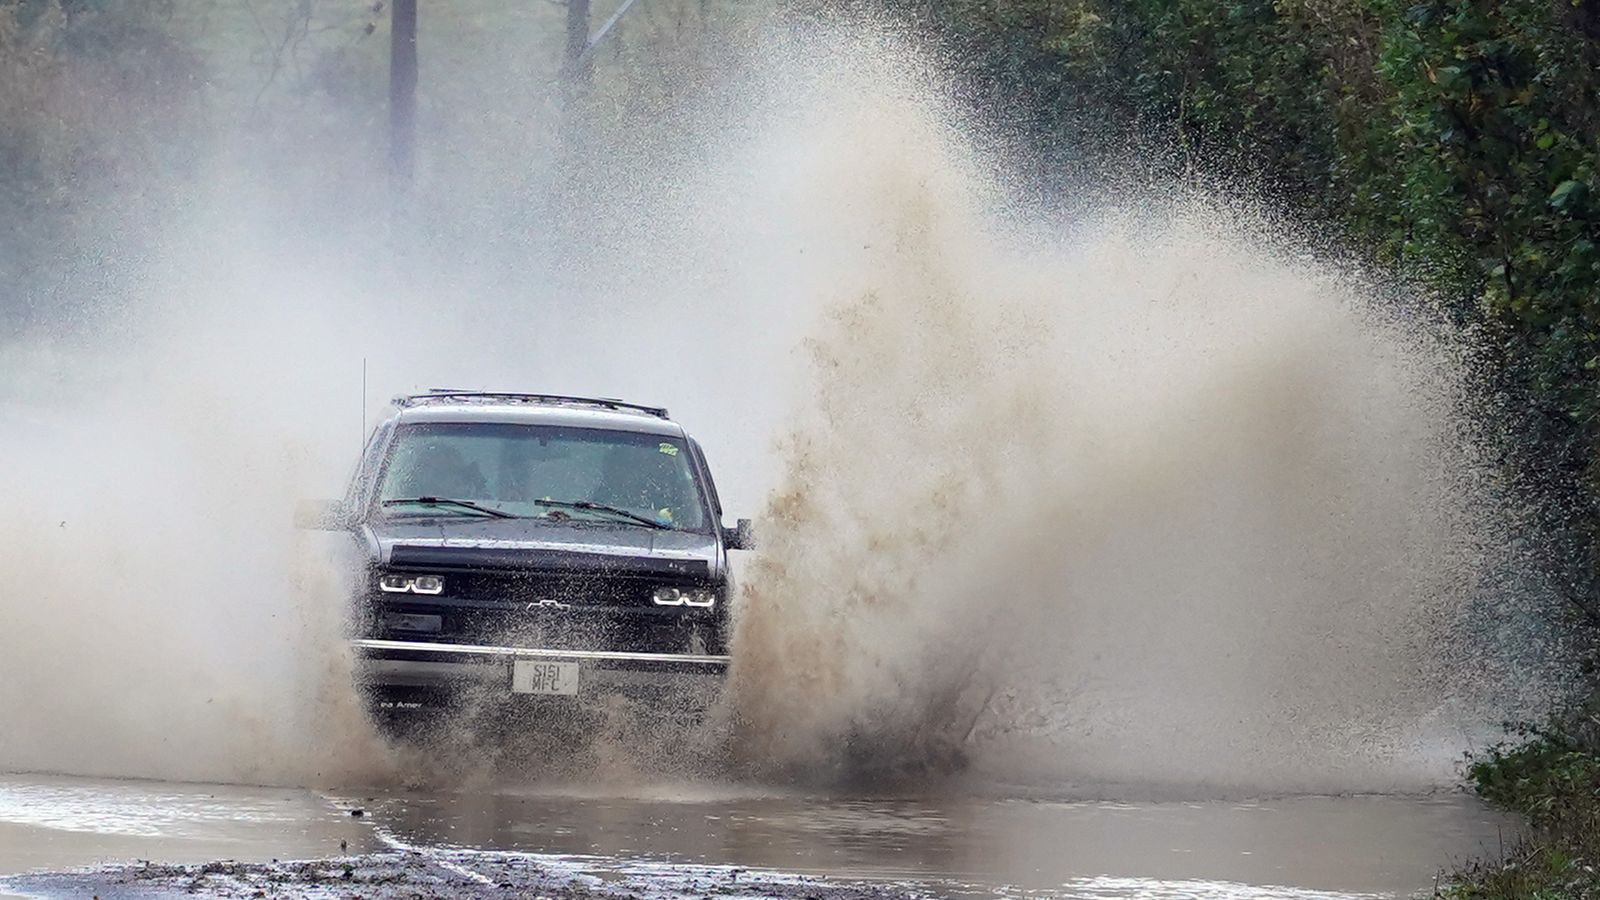 Storm Gerrit: UK weather warnings urge people to beware of strong winds and heavy rain across the country